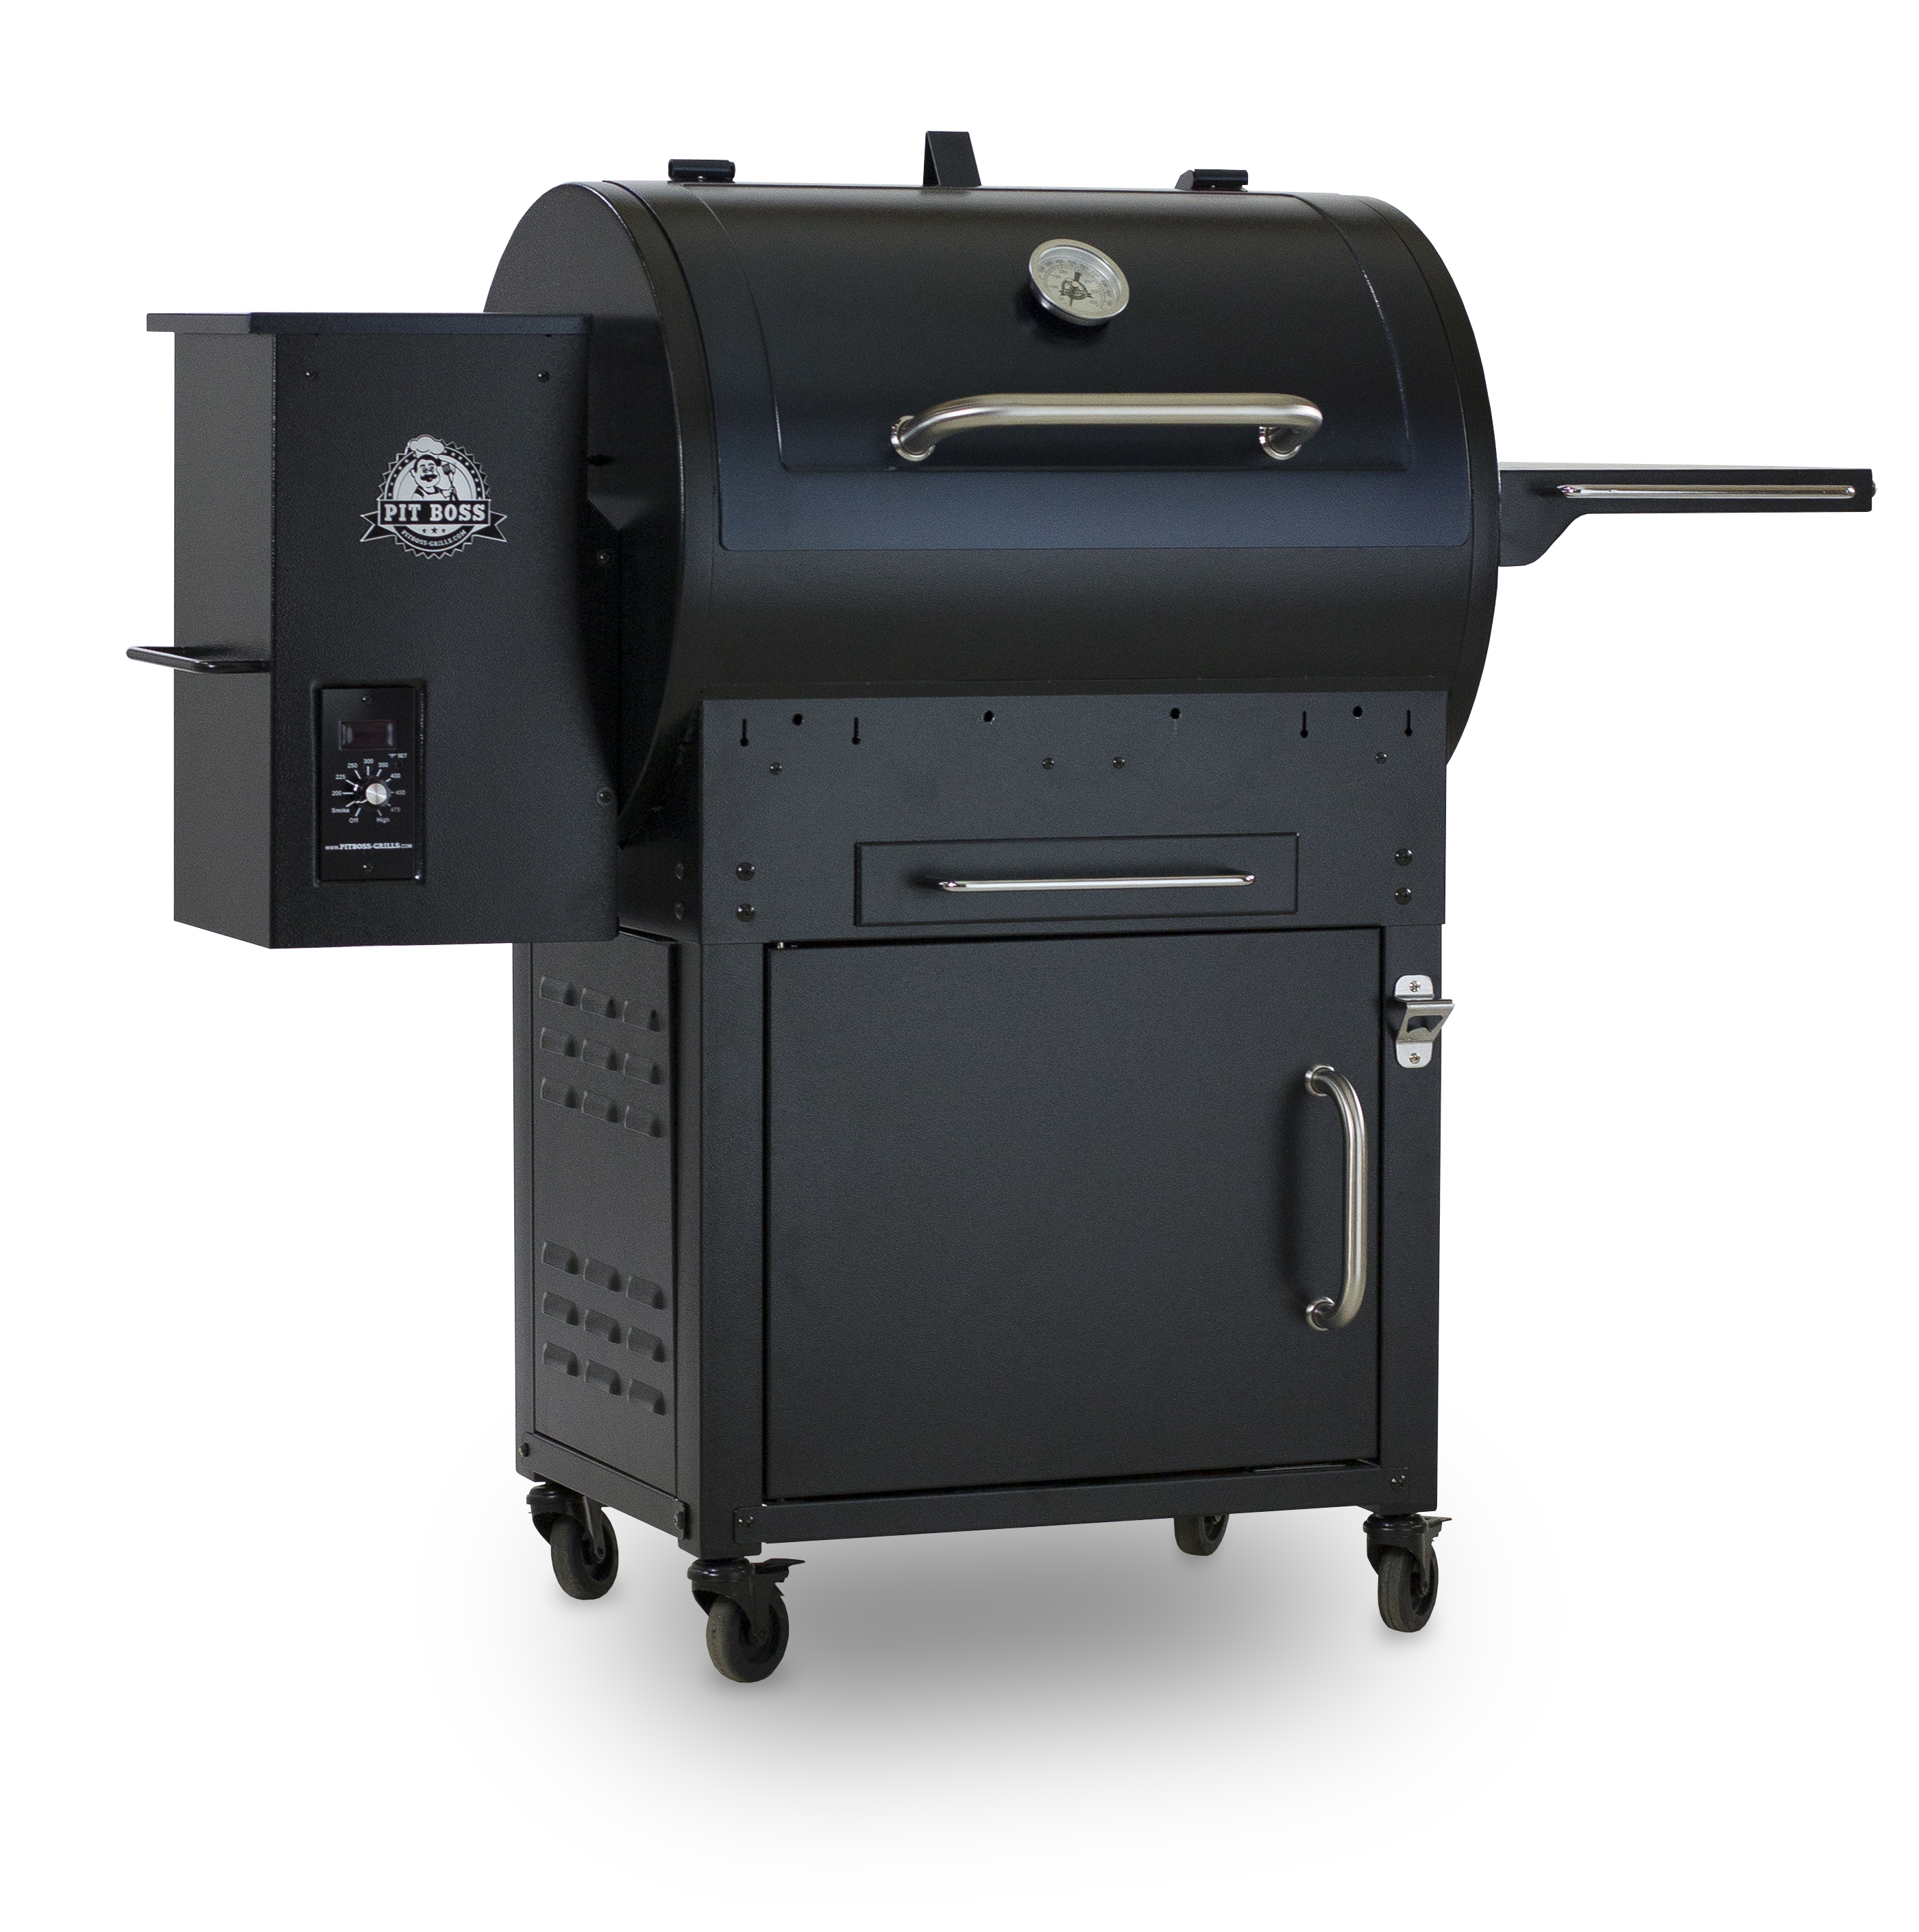 Pit Boss 700SC Wood Fired Pellet Grill with Flame Broiler - image 2 of 13